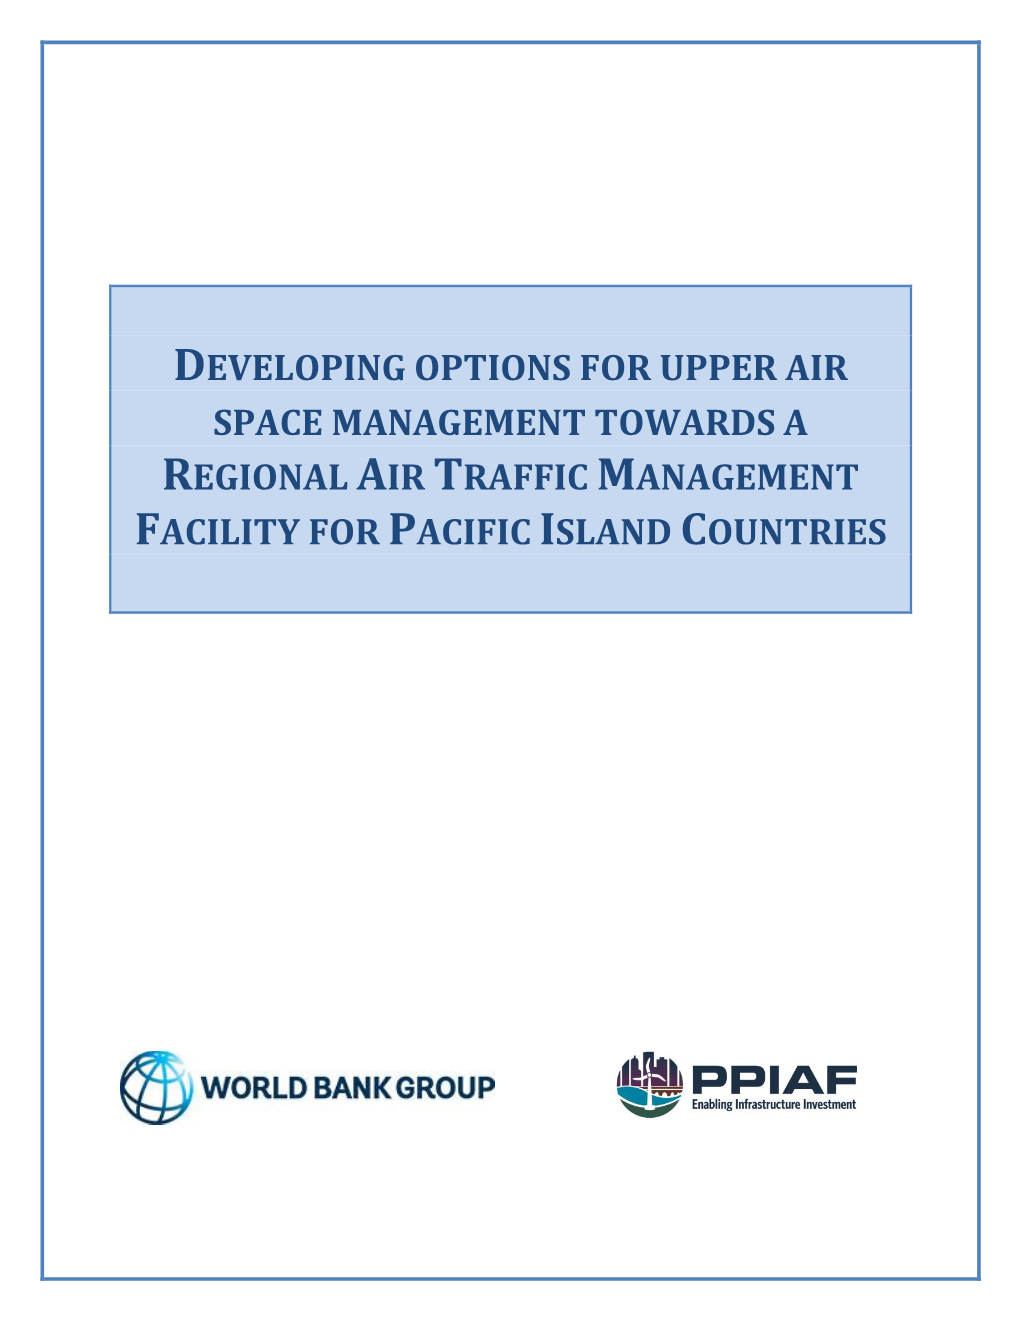 Regional Air Traffic Management Facility for Pacific Island Countries